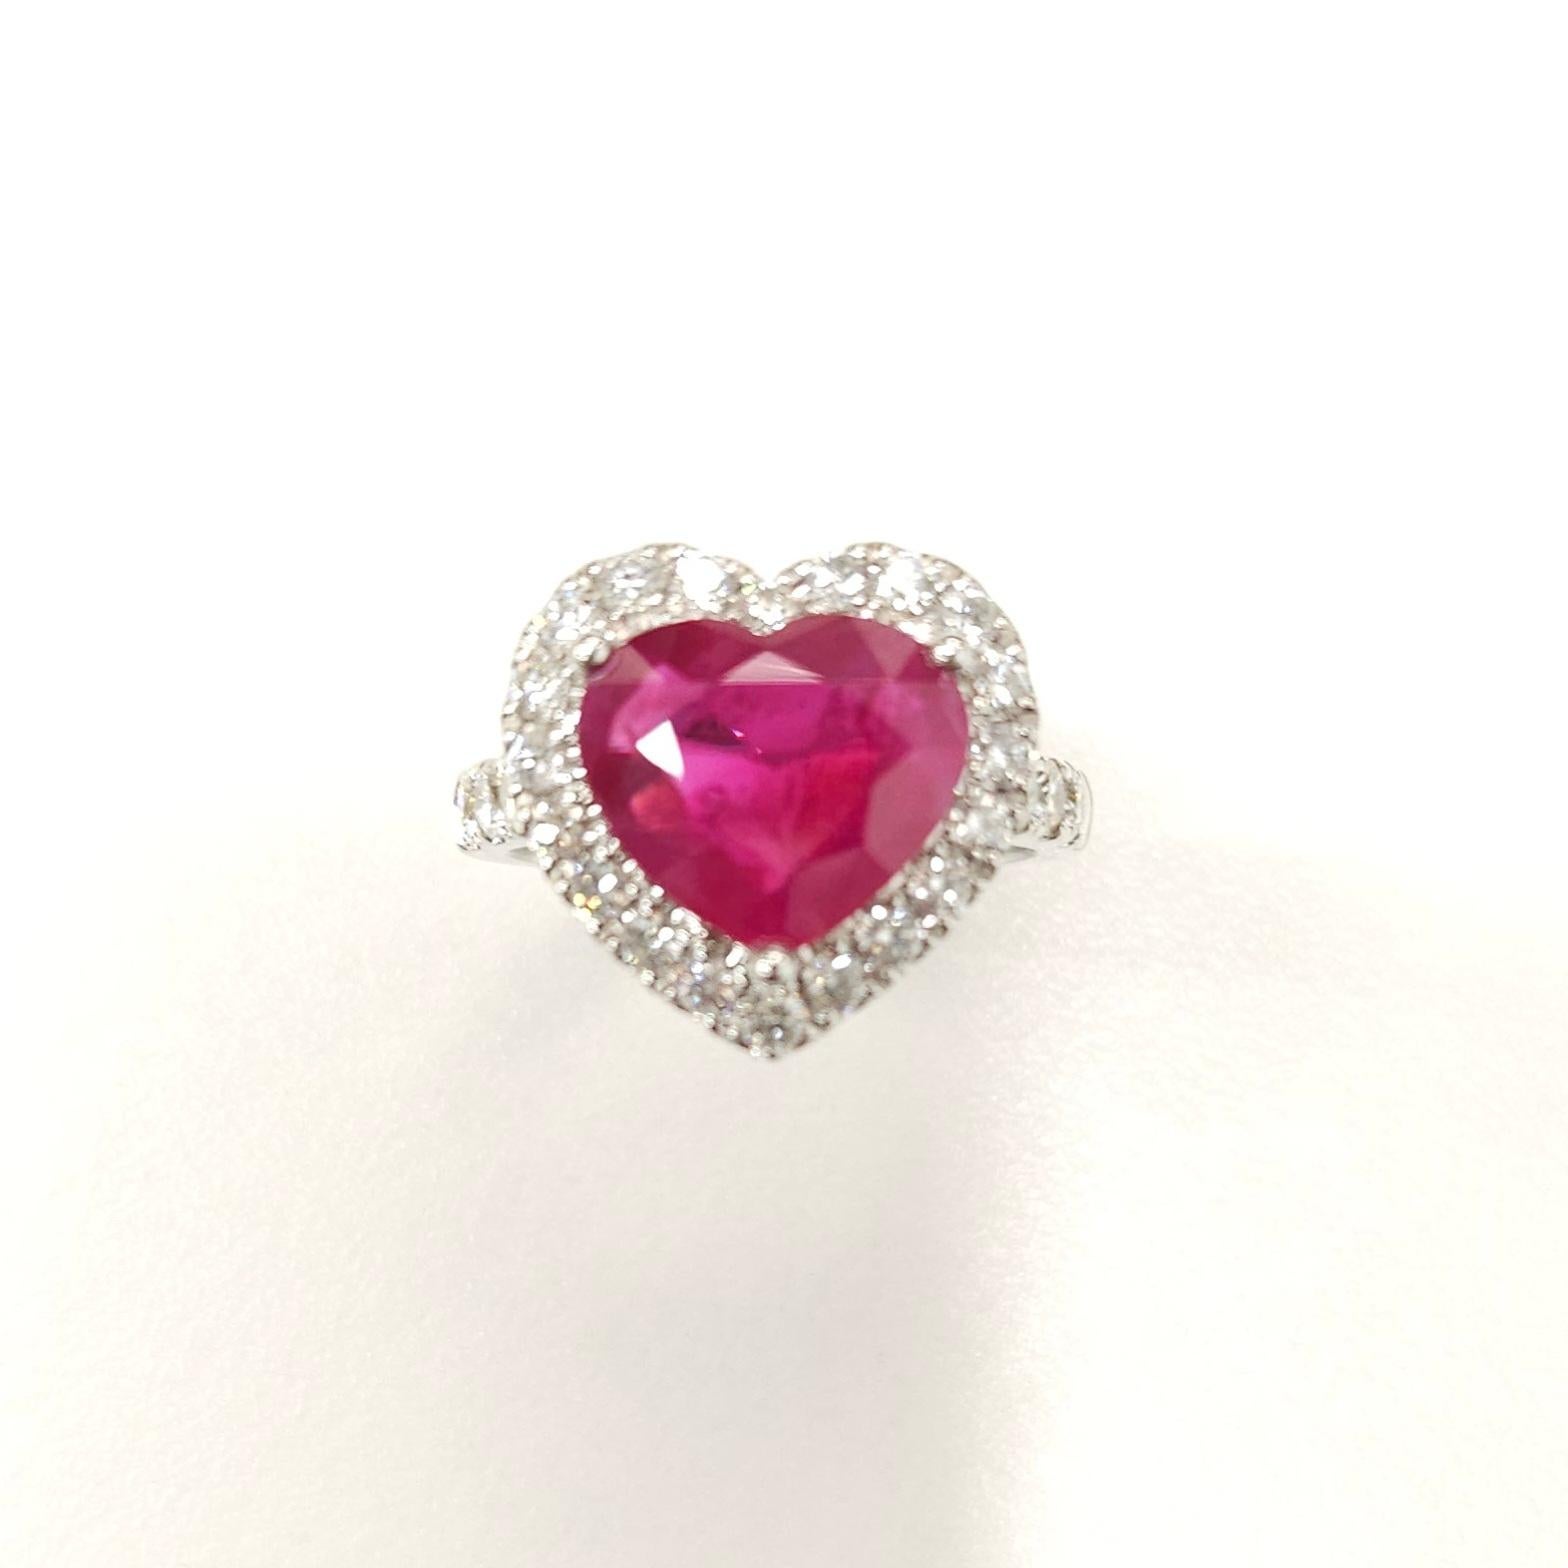 Burmese rubies are sought after for their beautiful red tones. This 18k white gold ring featuring a 3.08 carat rare heart-shaped ruby is a great example of the Burmese allure - deep red tones with the slightest hint of pink. Halo set with round